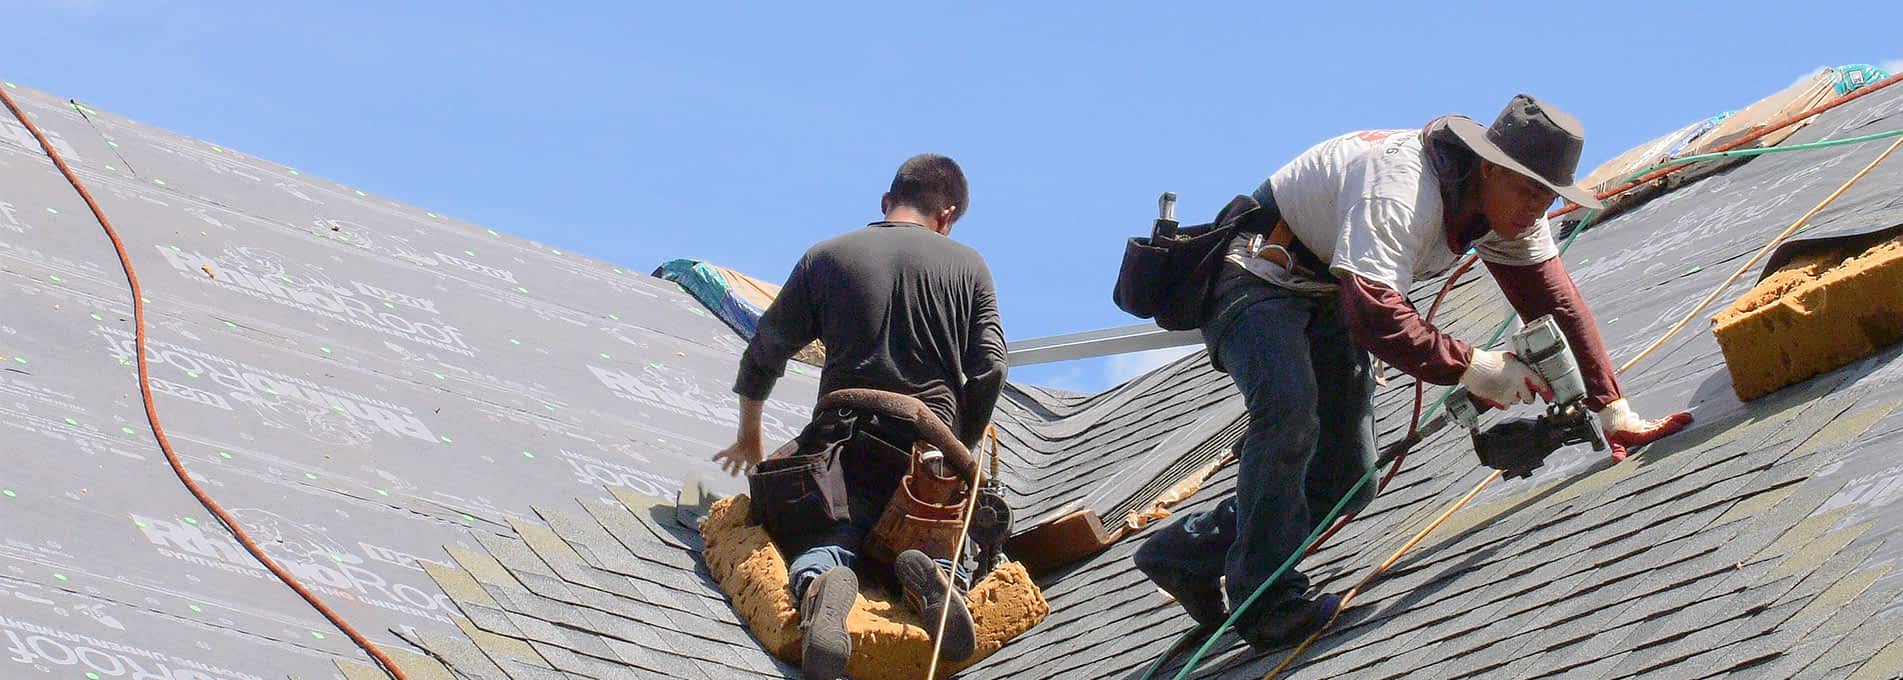 Flagstaff Roof Repairs | DIY Safety Tips